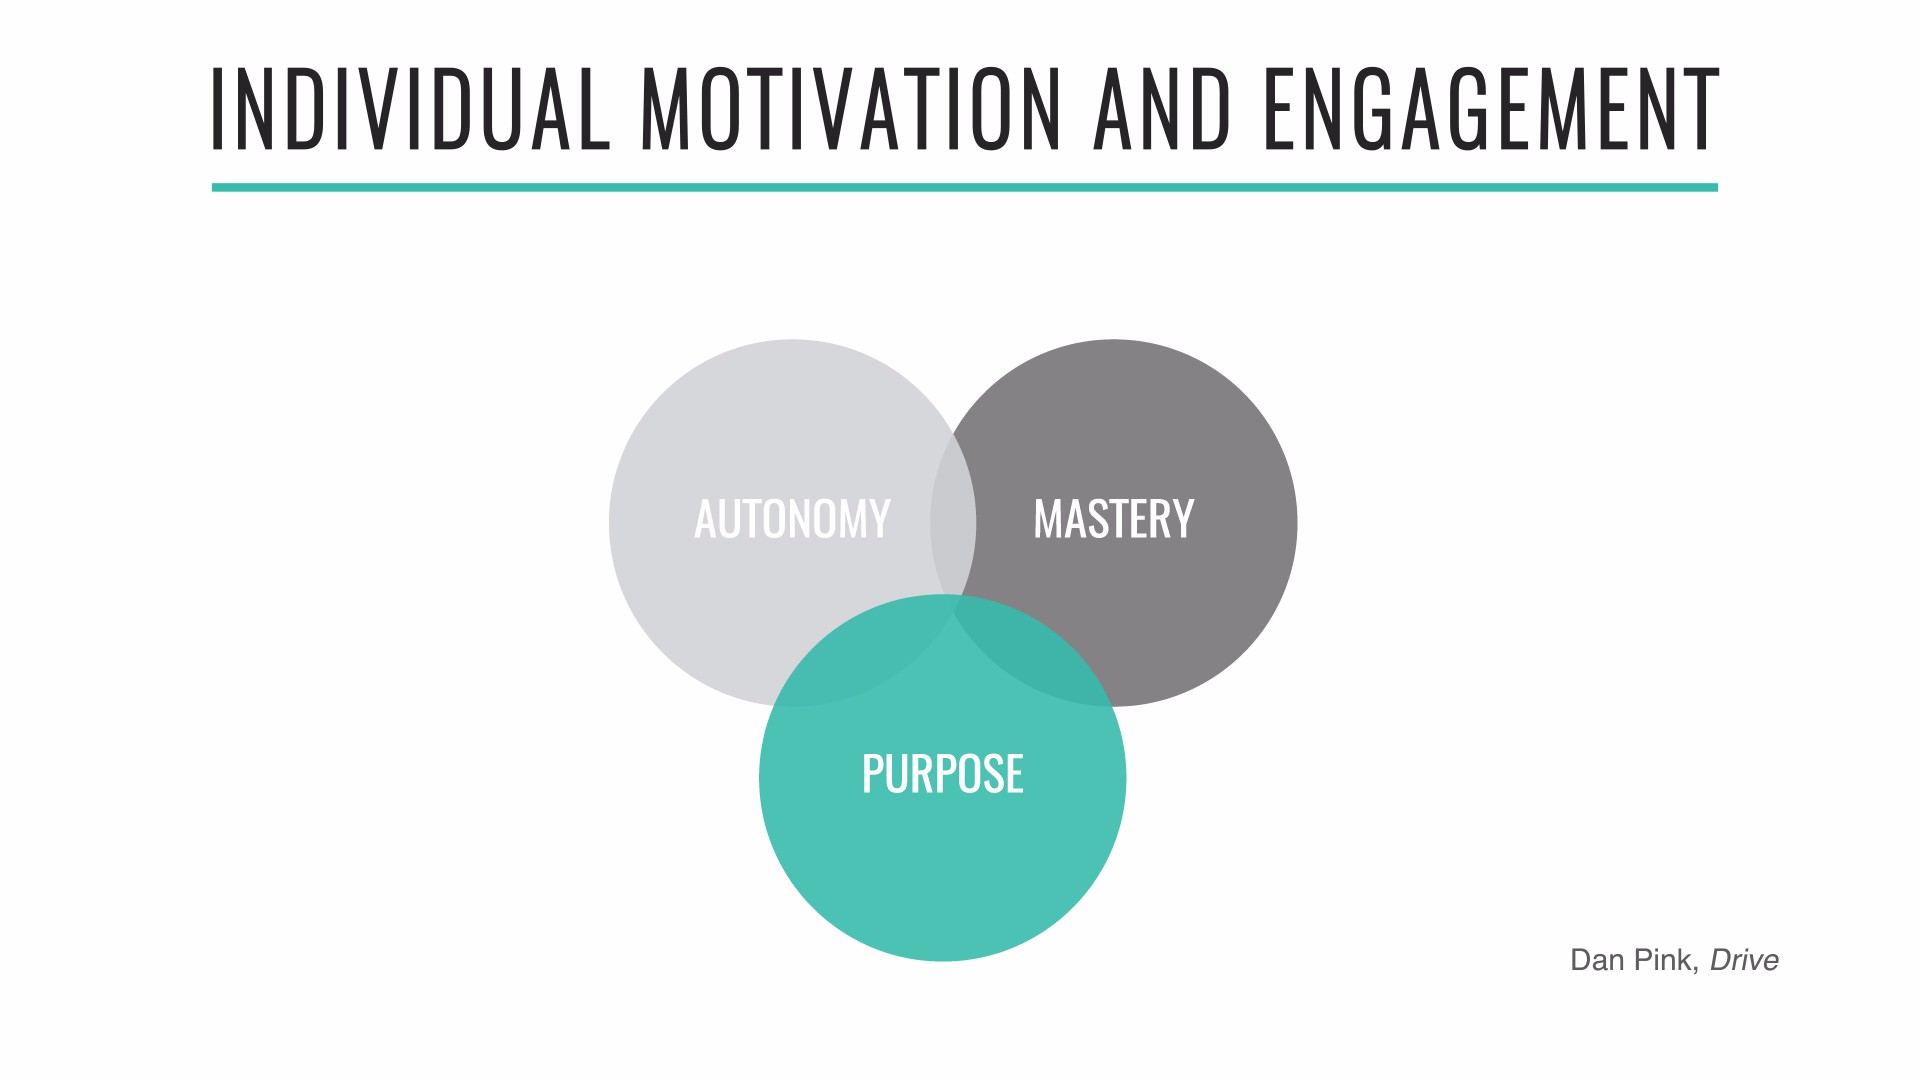 Individual motivation and engagement